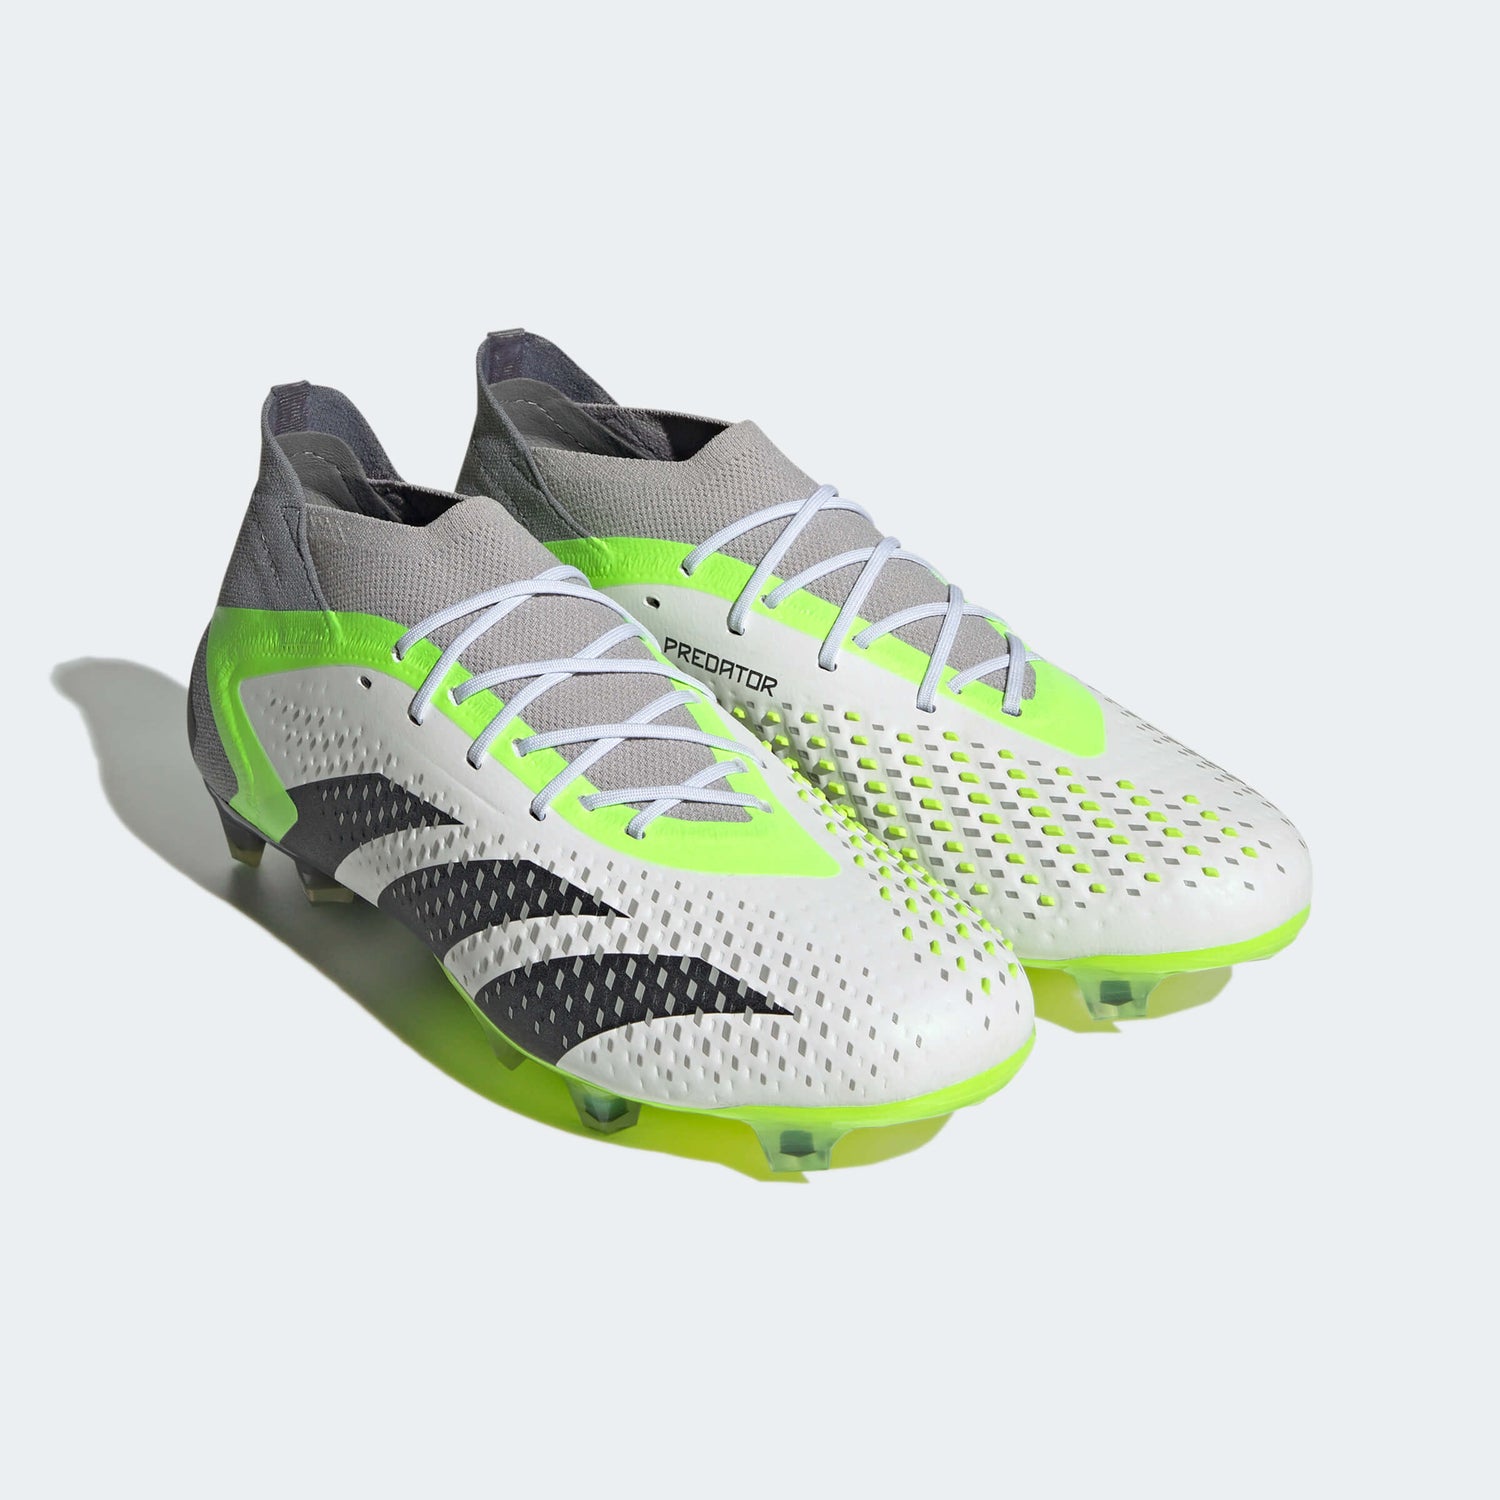 adidas Predator Accuracy.1 FG - Crazyrush Pack (FA23) (Pair - Lateral Front)